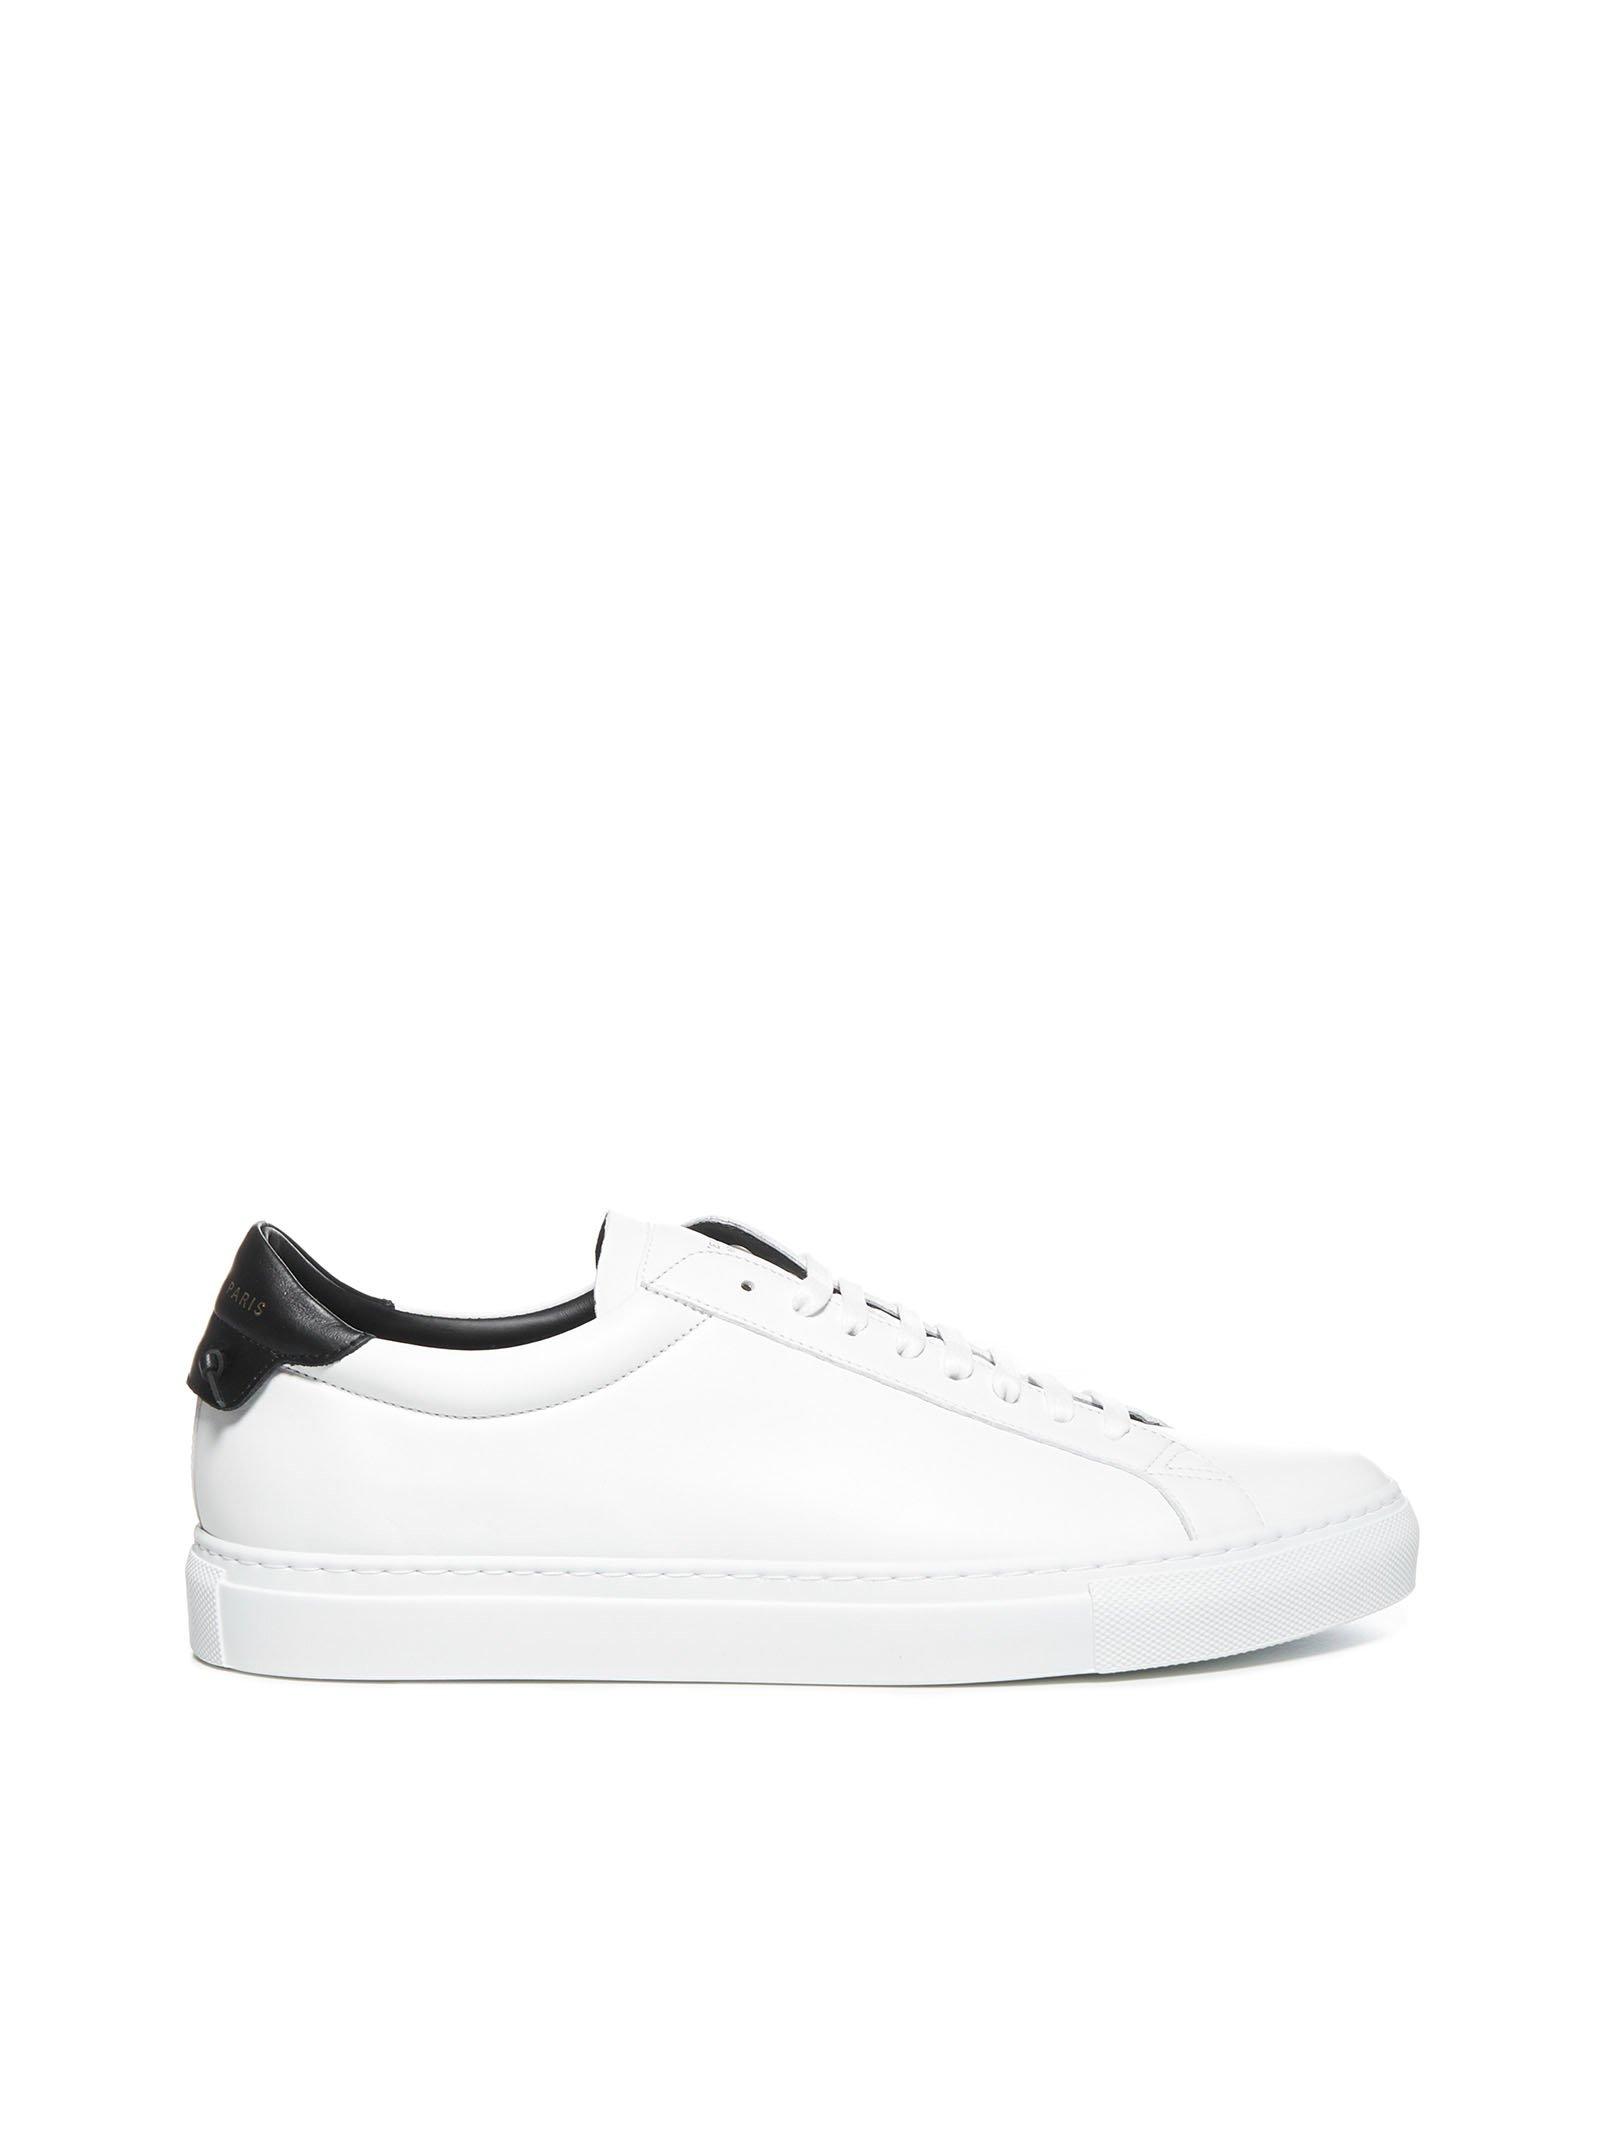 Givenchy Leather Urban Street Low-top Sneakers in White for Men - Lyst